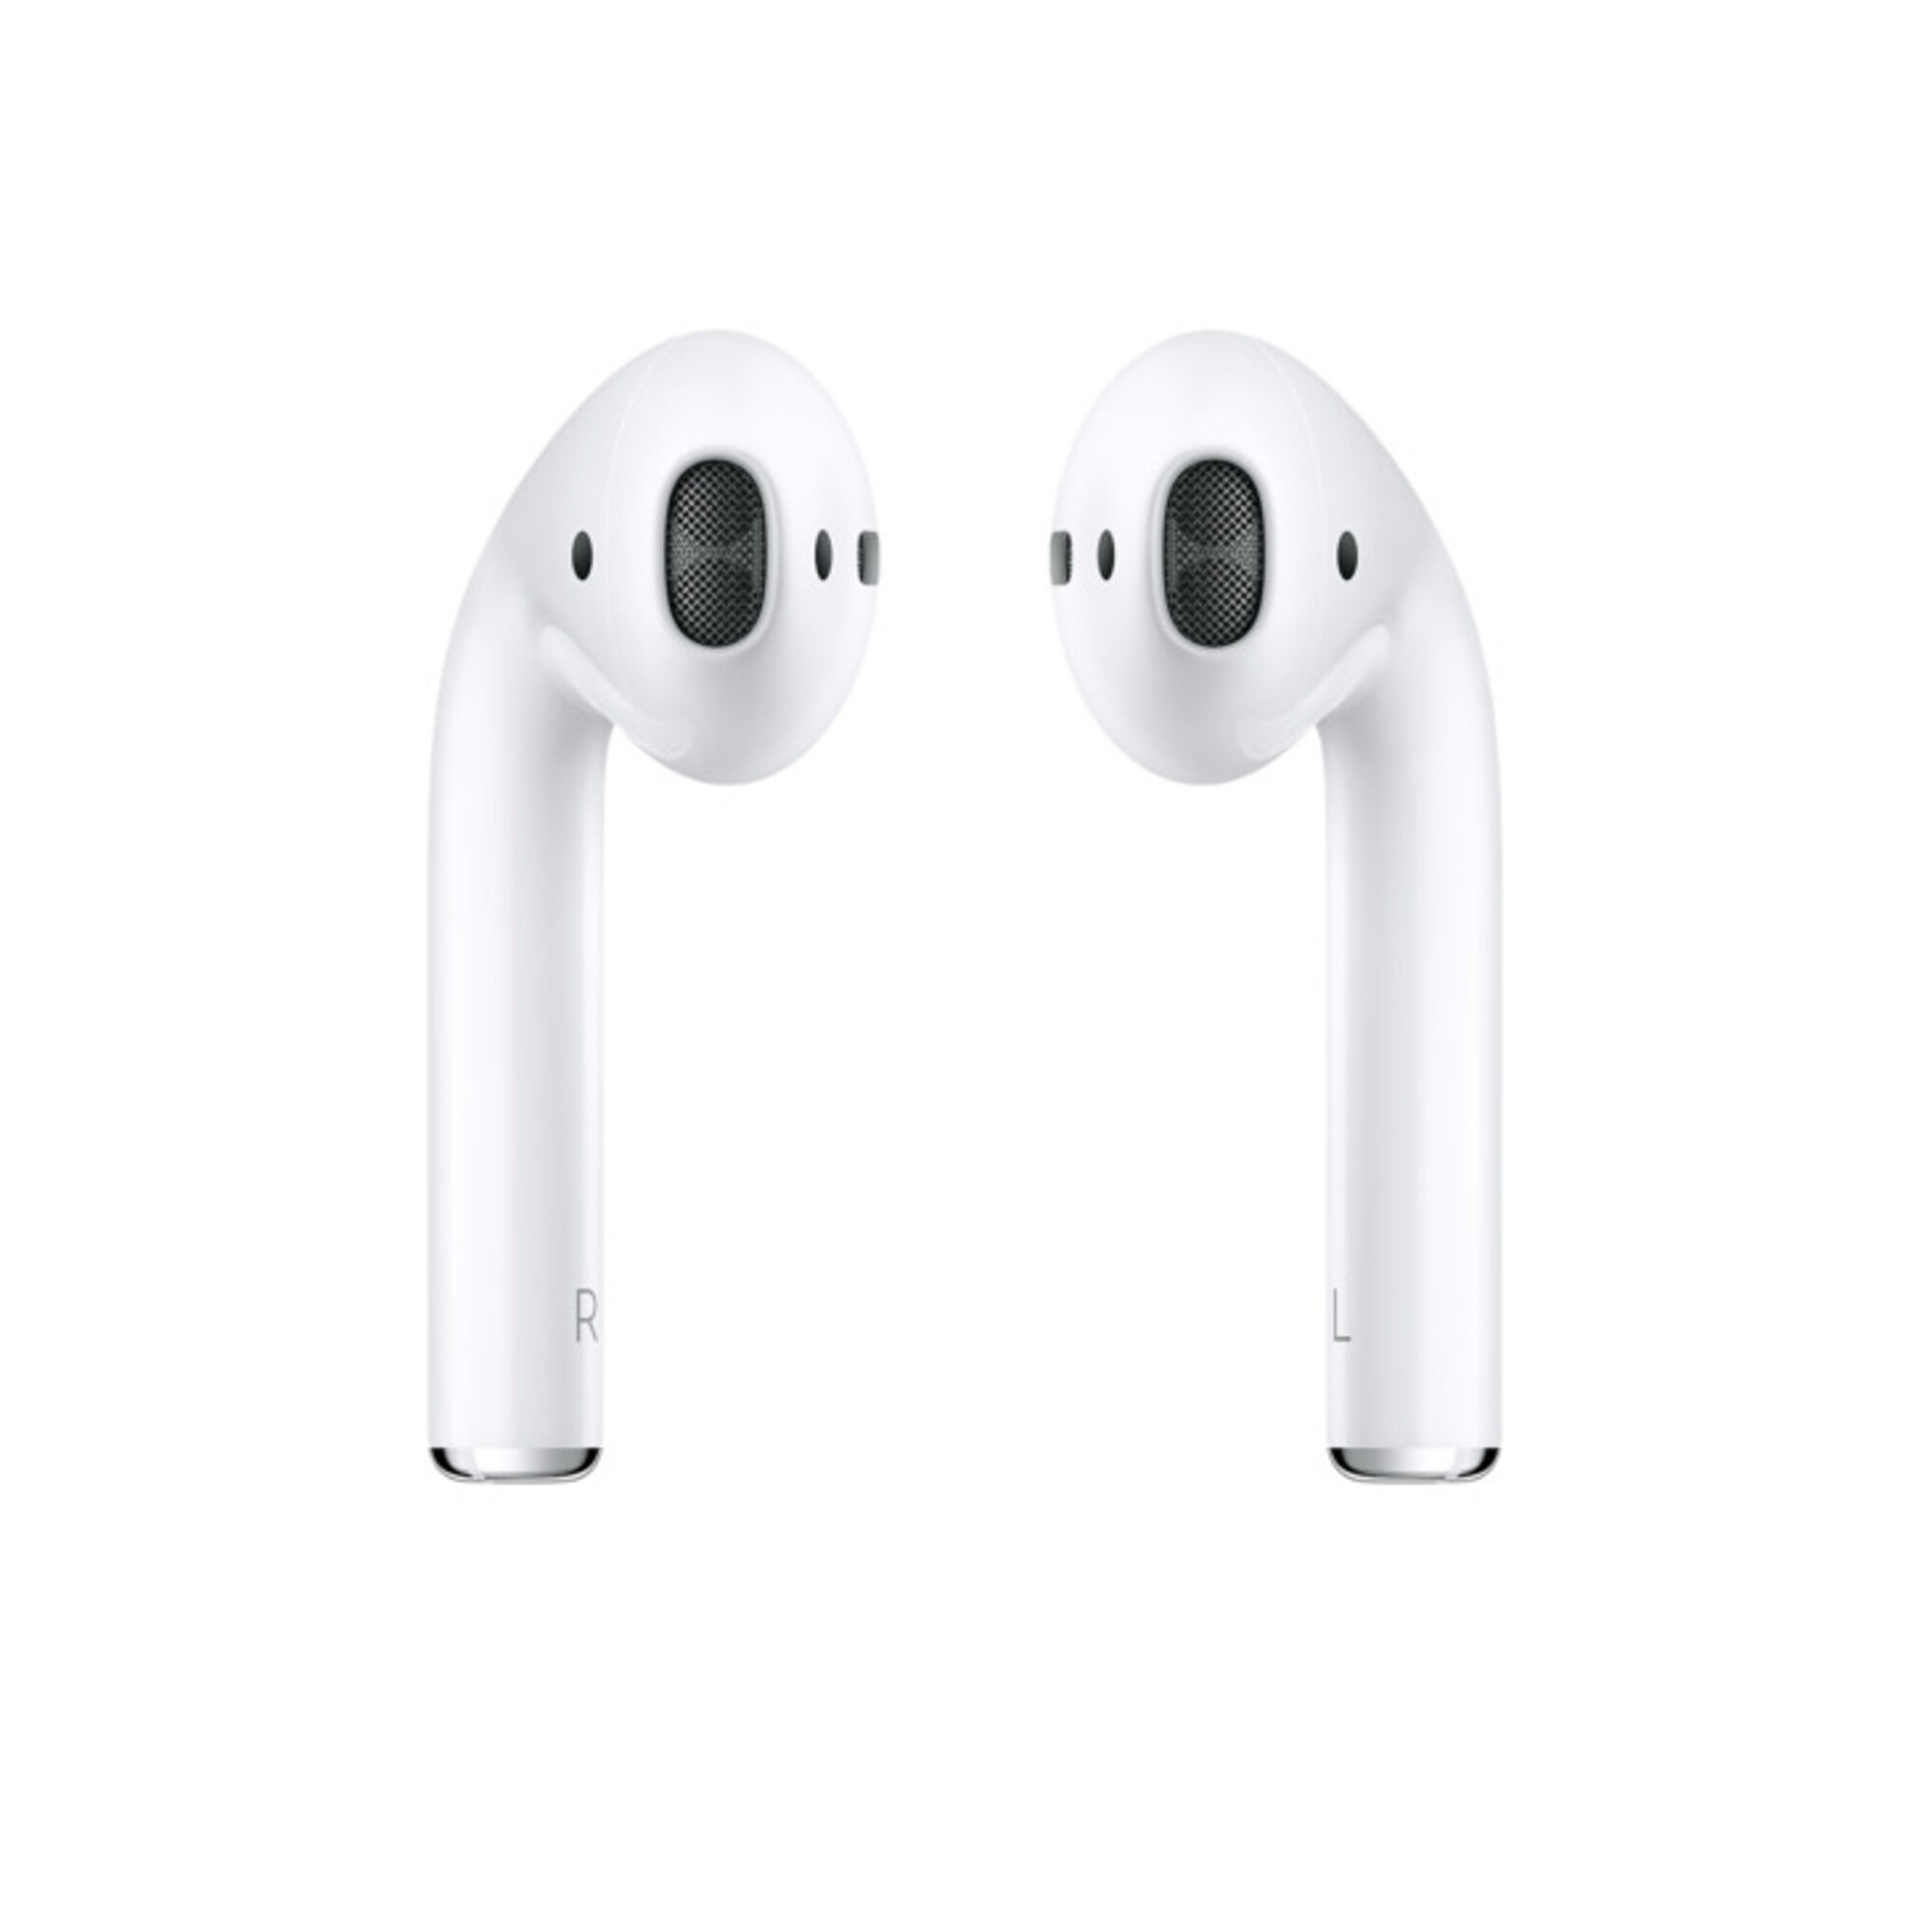 (OCCASION) Apple Airpods - écouteurs intra-auriculaires Bluetooth blancs - Neuf